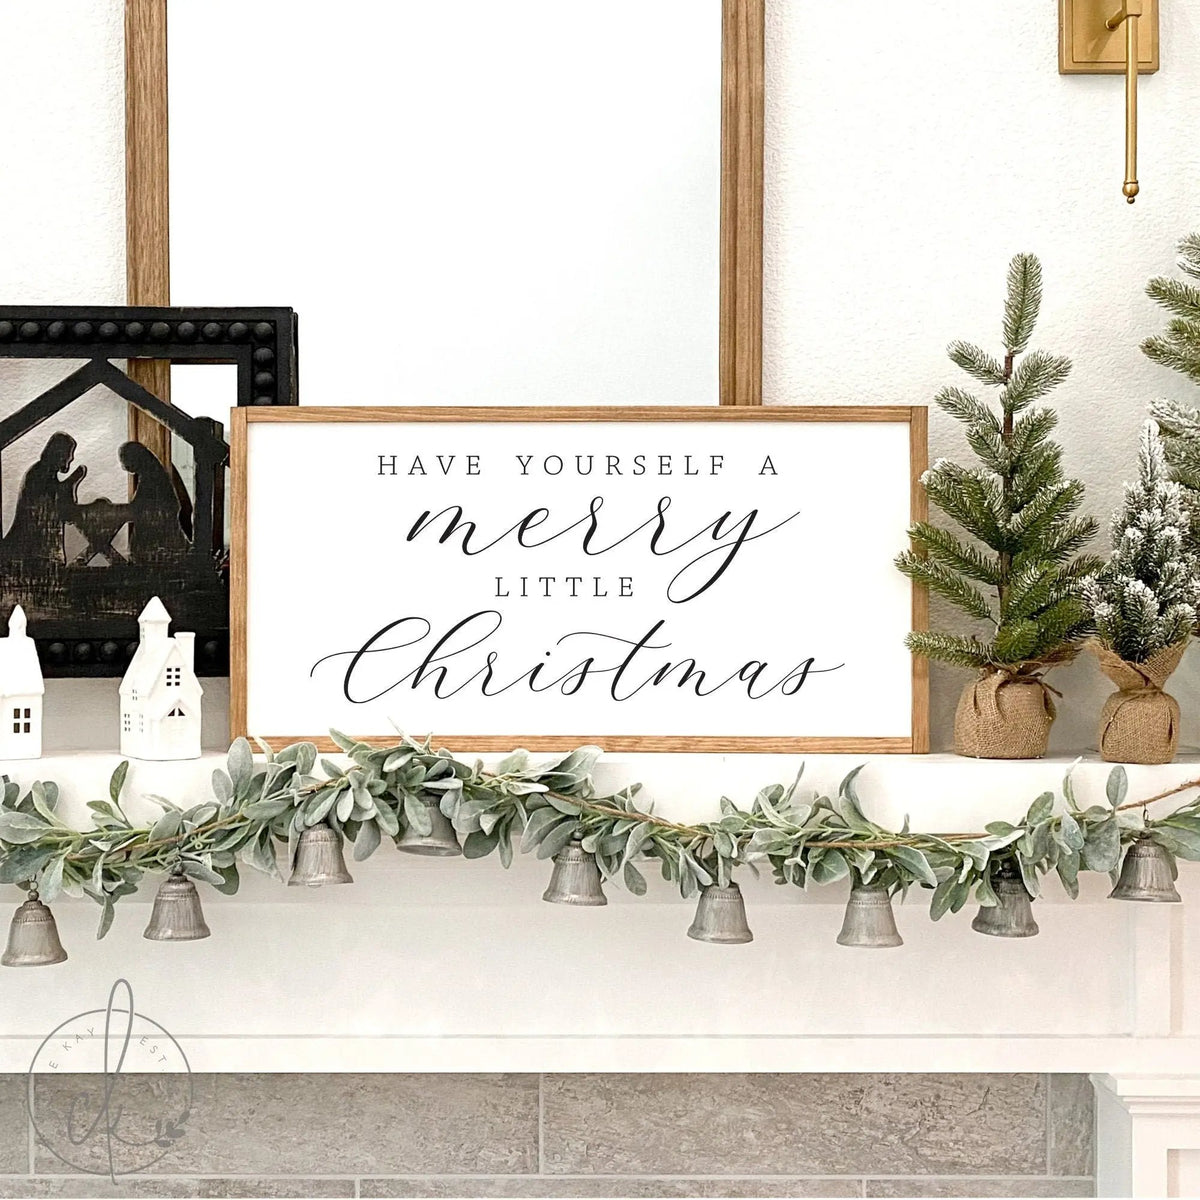 Have yourself a merry little Christmas sign | Christmas signs |  Christmas wall decor | Christmas home decor | wood sign